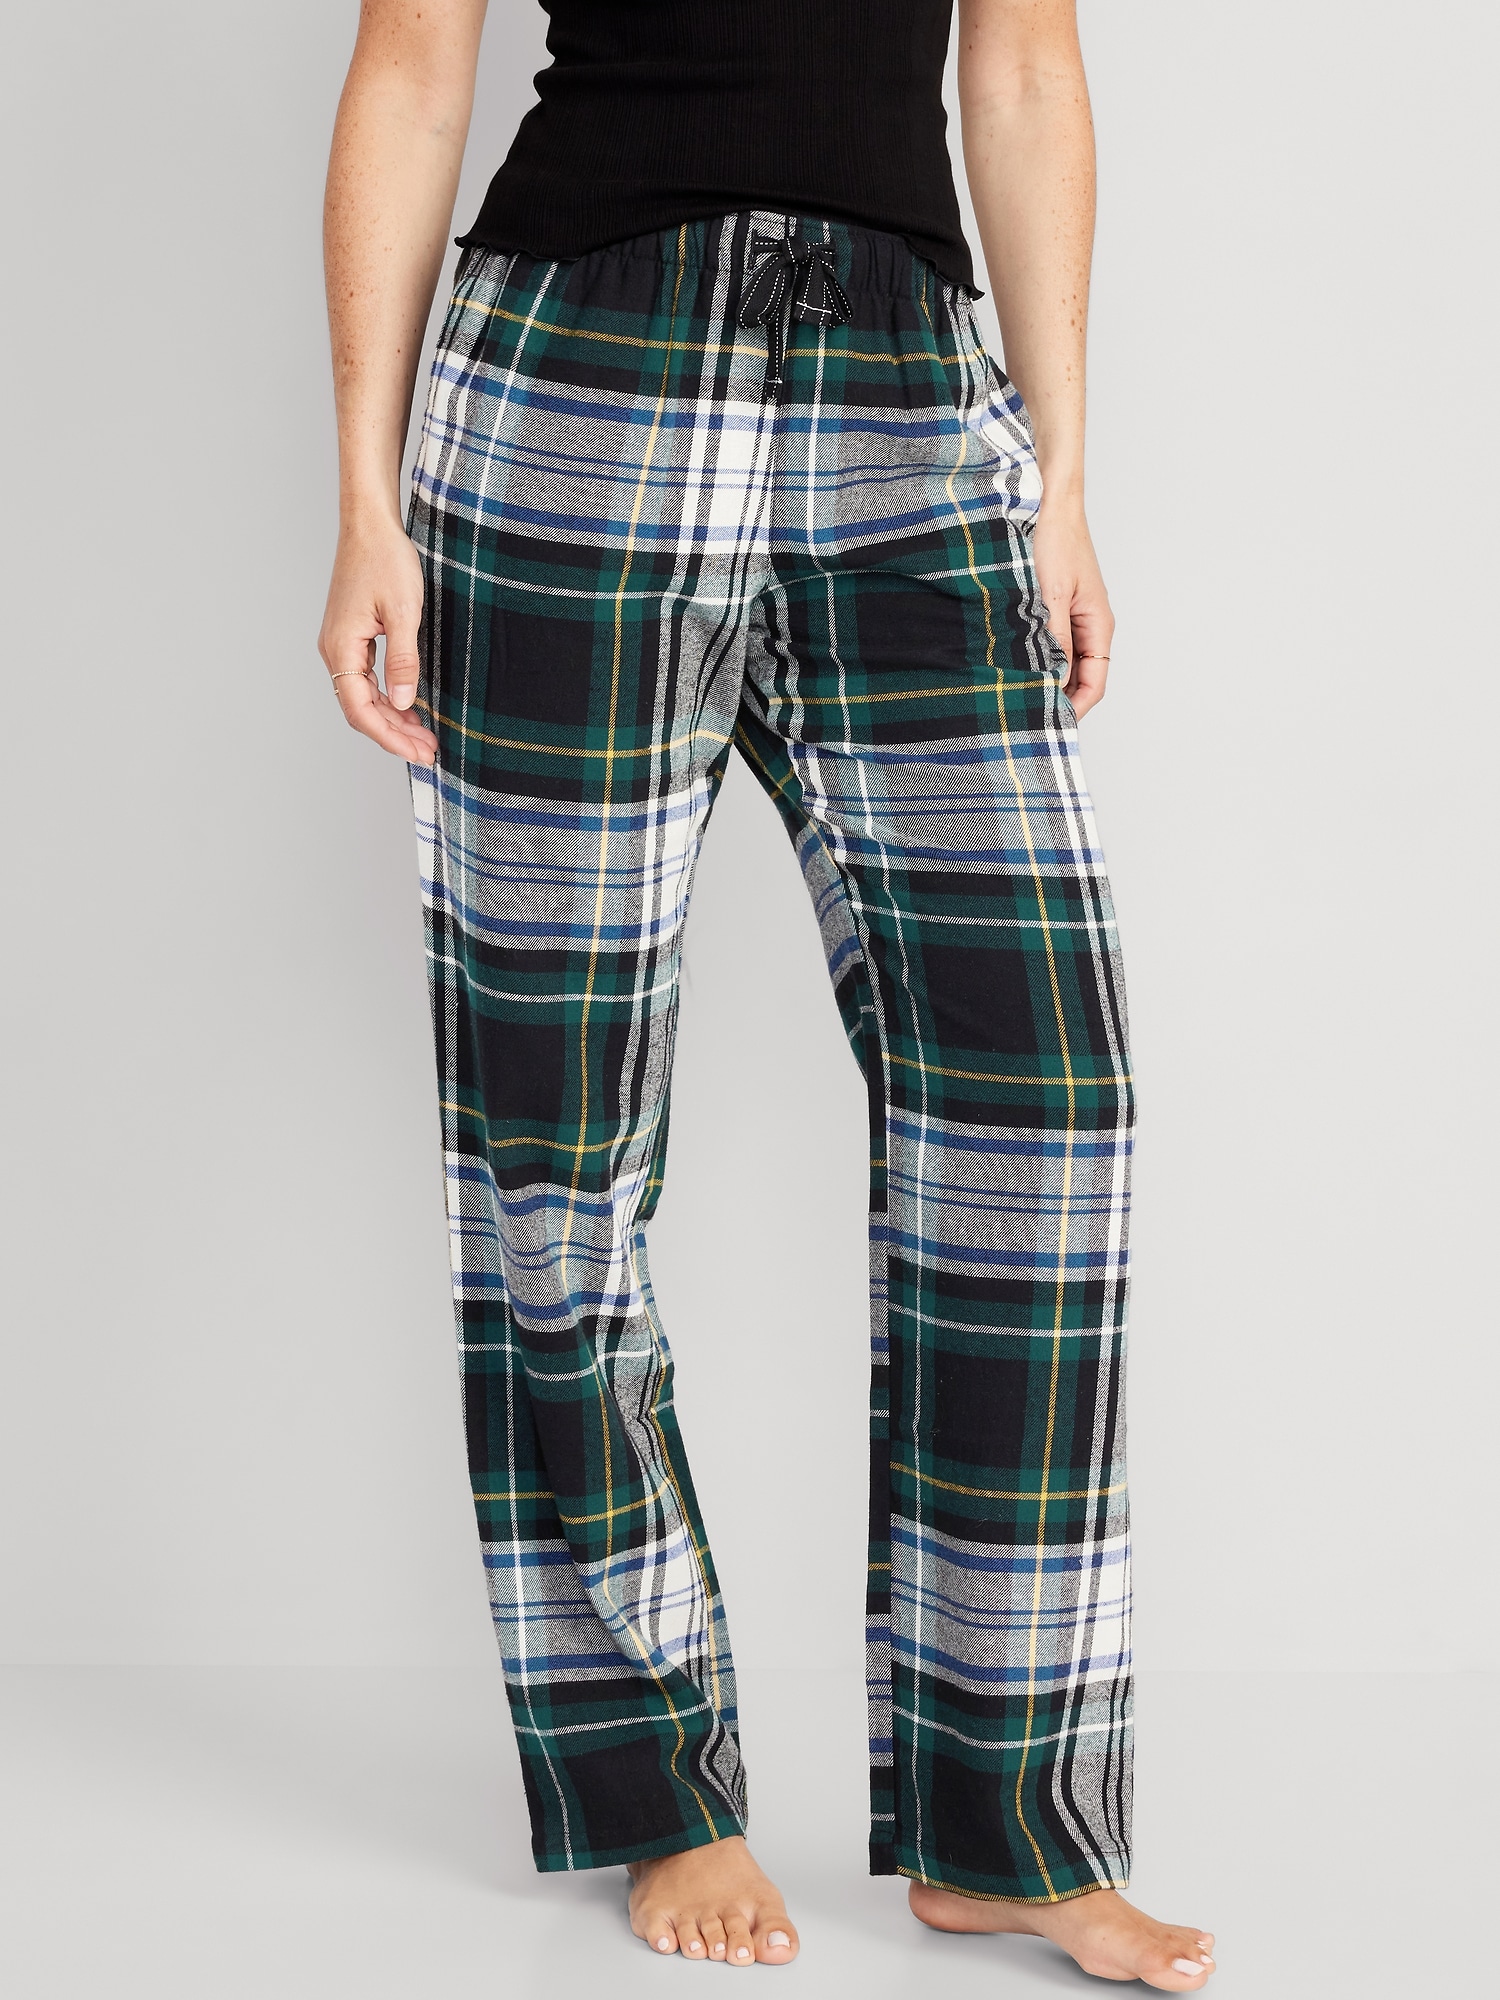 HOT* $5 Old Navy PJ Pants for the Family, today only!!